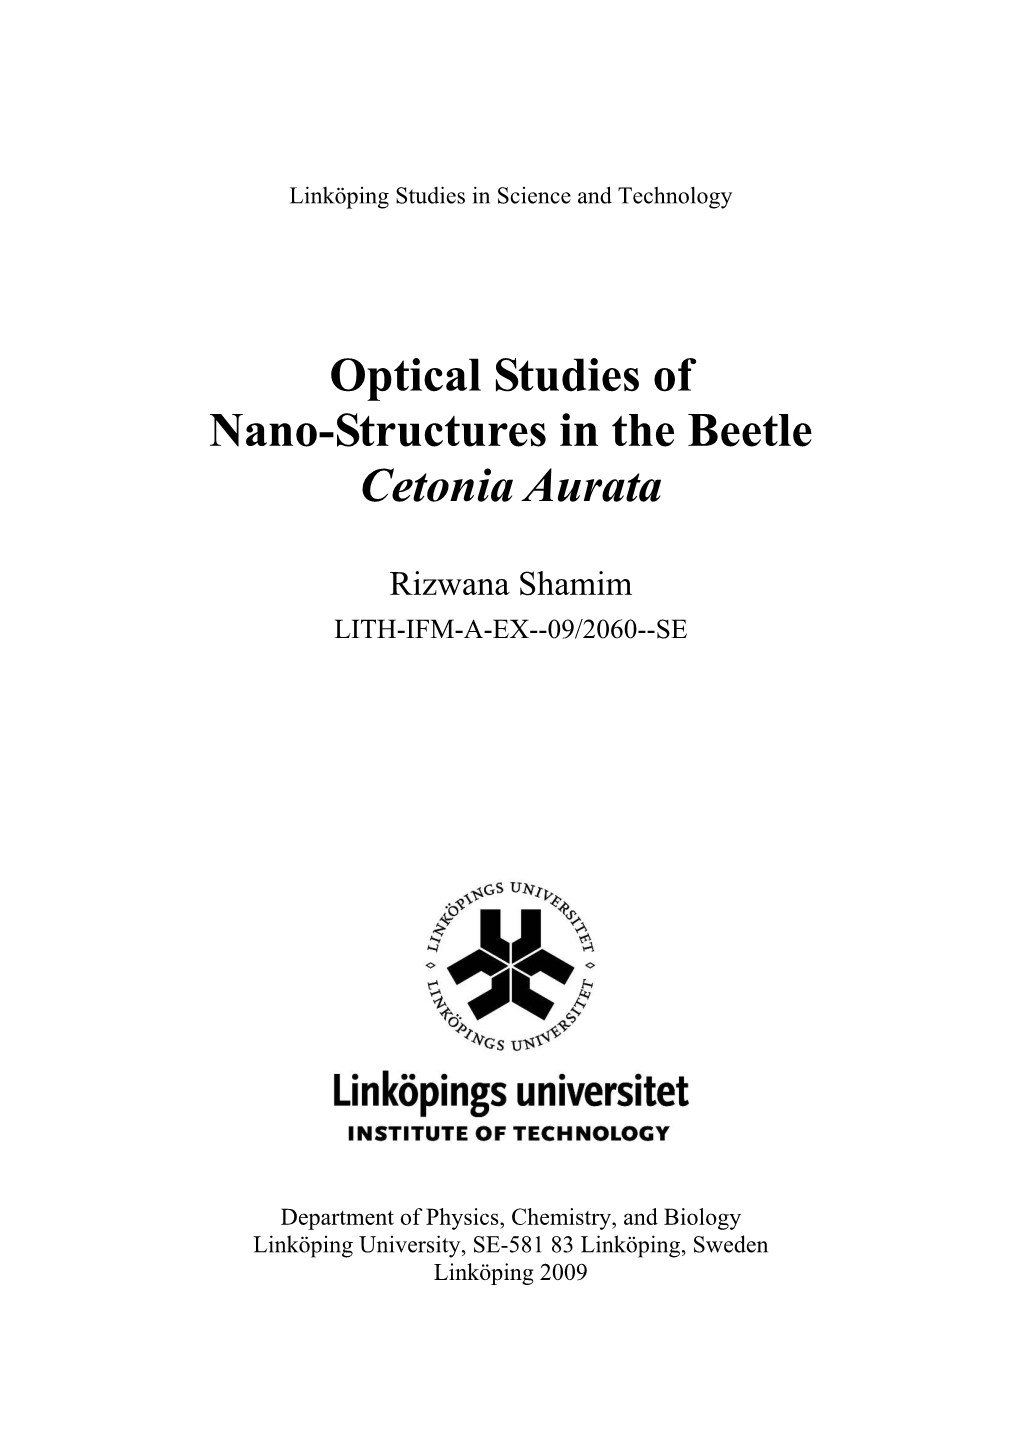 Optical Studies of Nano-Structures in the Beetle Cetonia Aurata